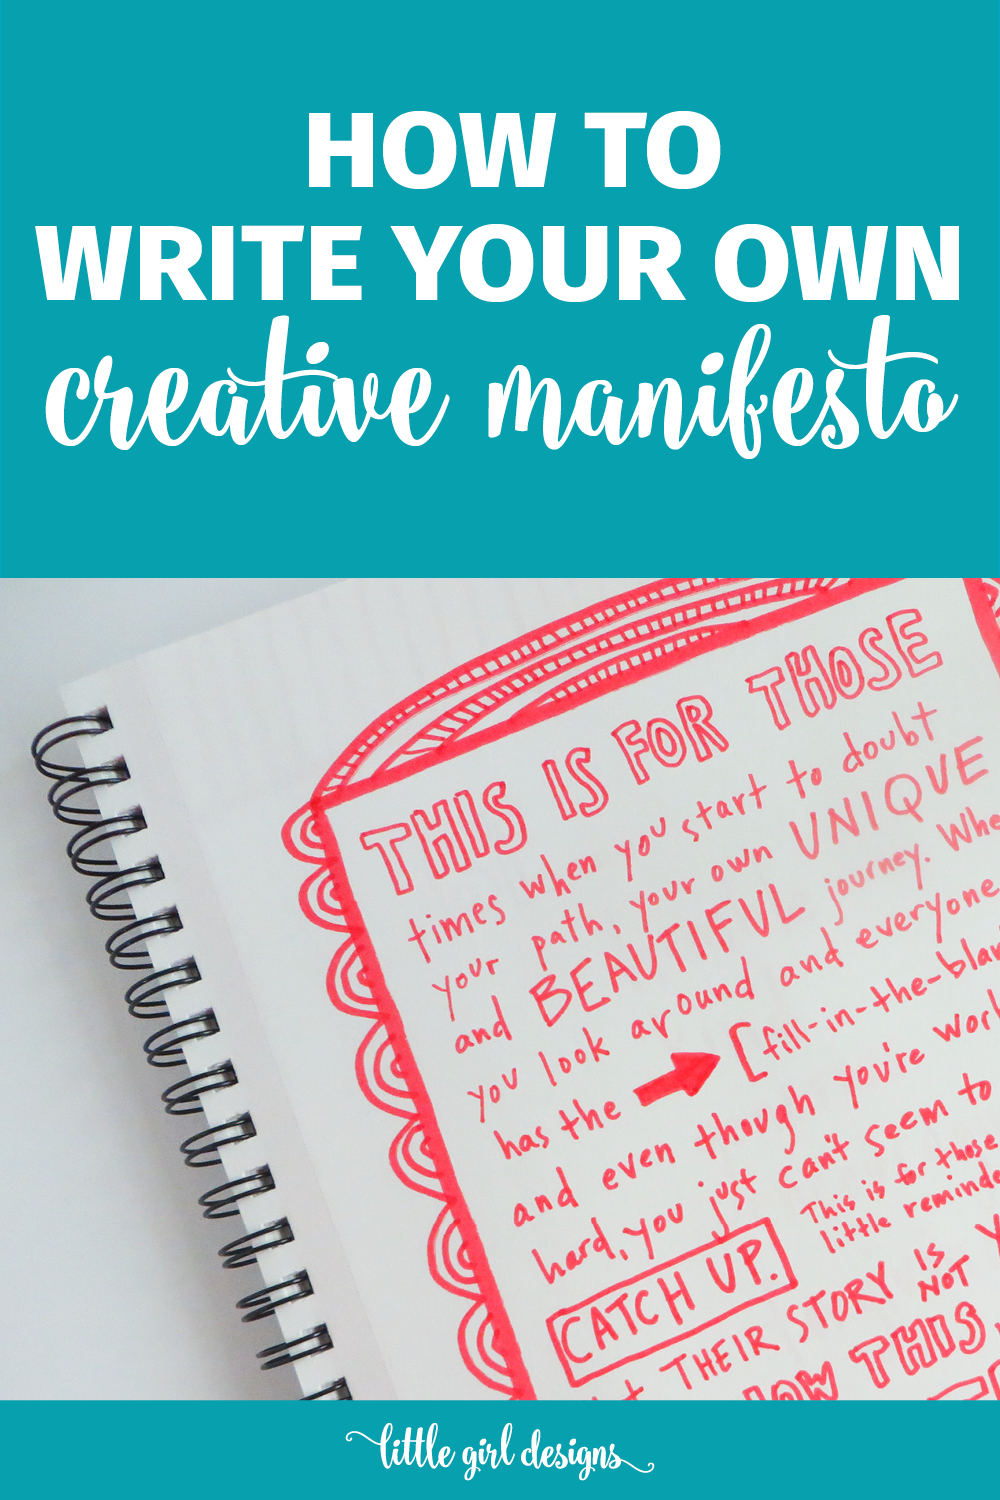 Learn how to write a creative manifesto to remind yourself to silence your inner critic and keep on doing the beautiful work of creating. Love this.